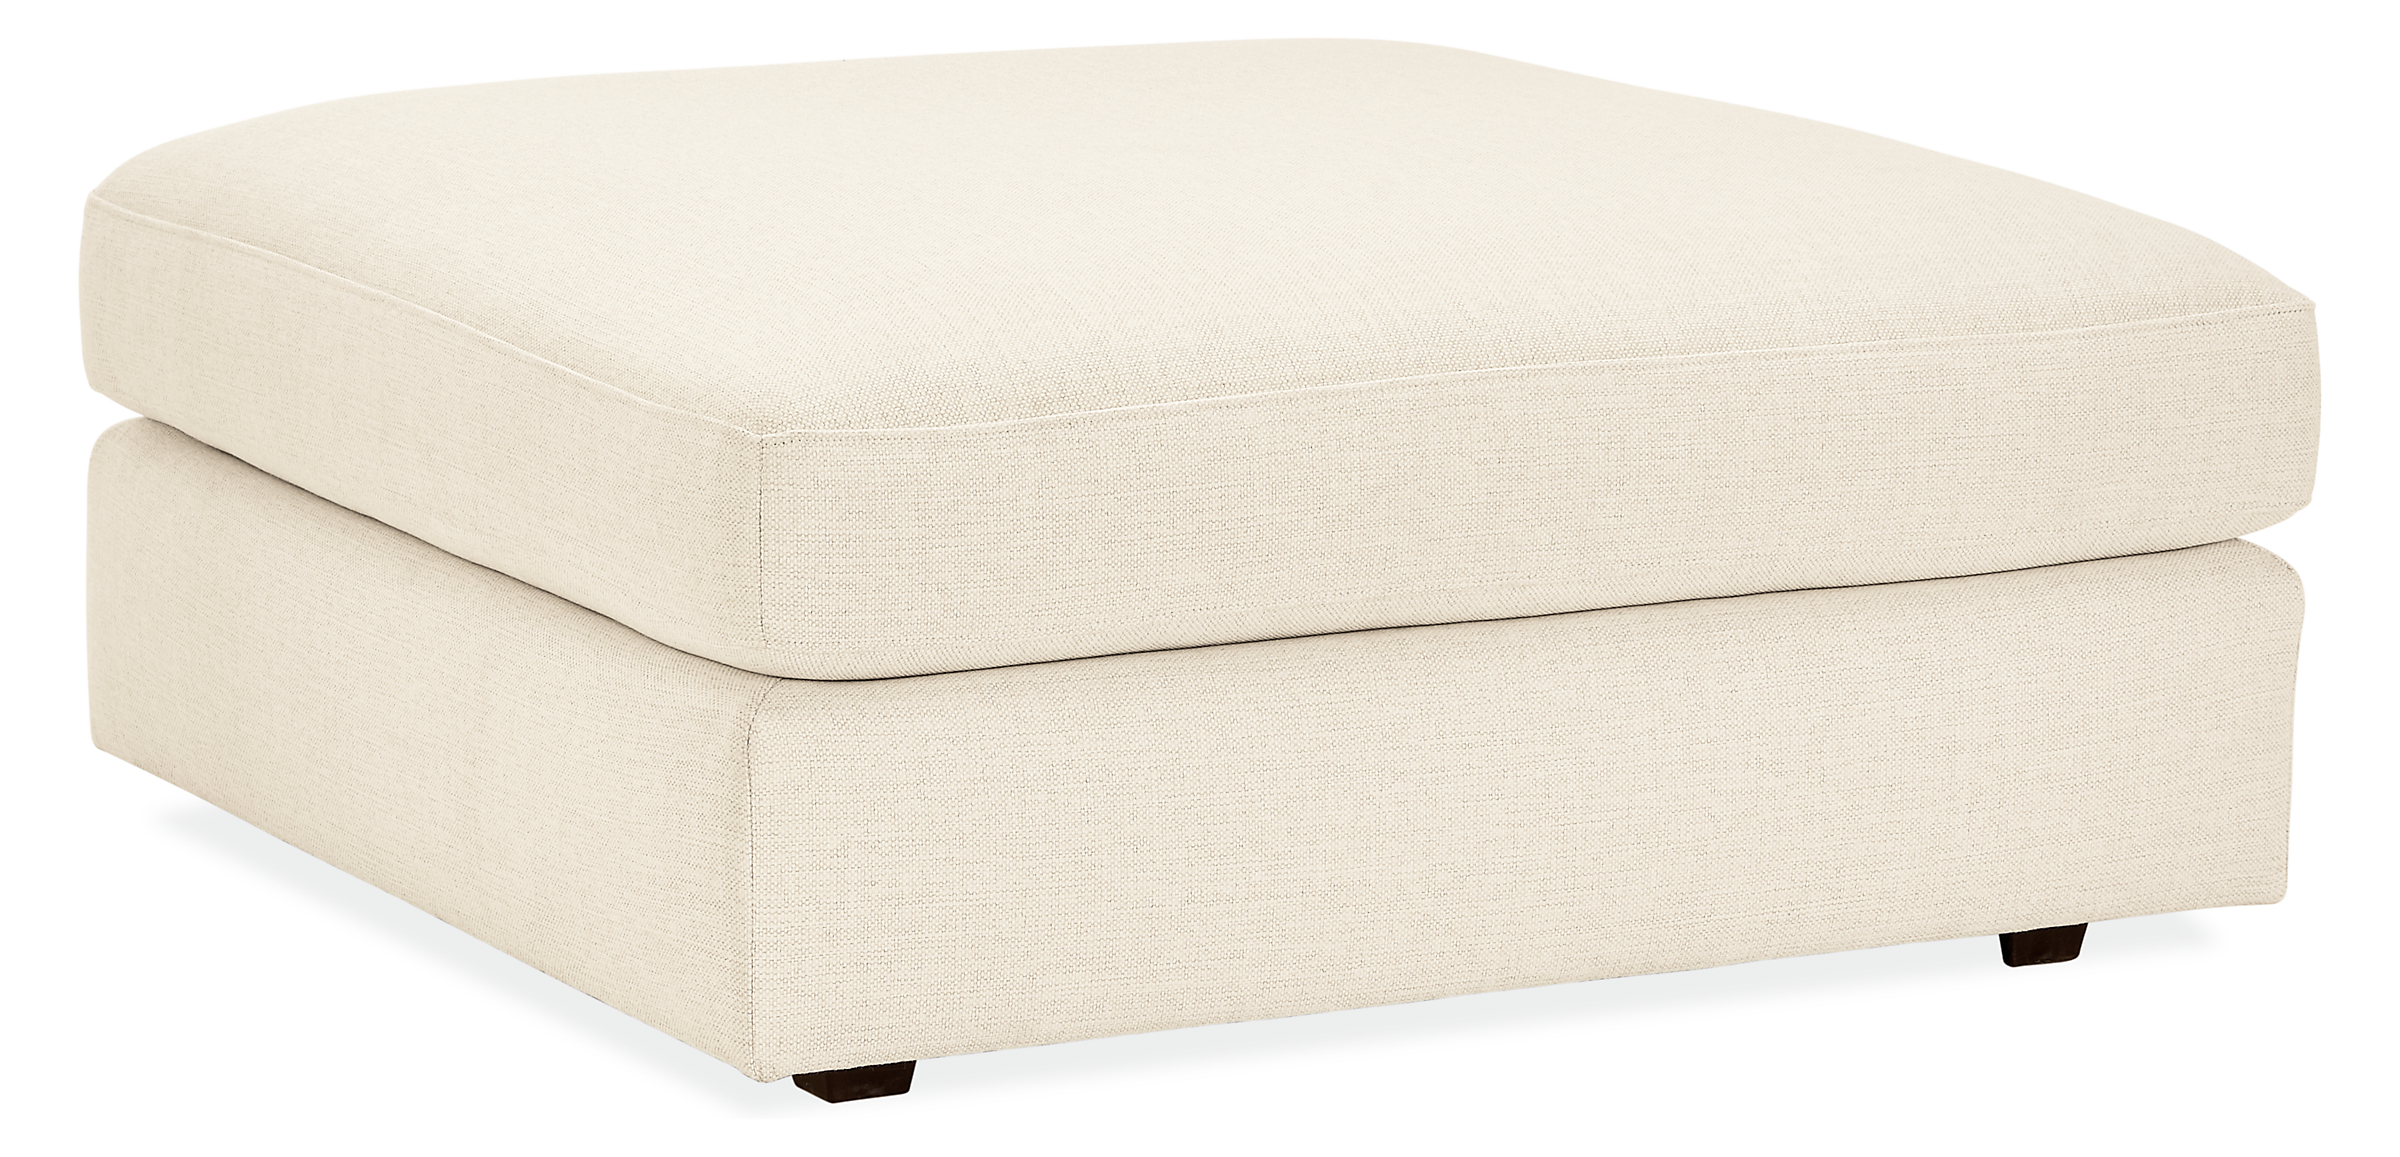 Astaire 37w 37d 16h Square Ottoman